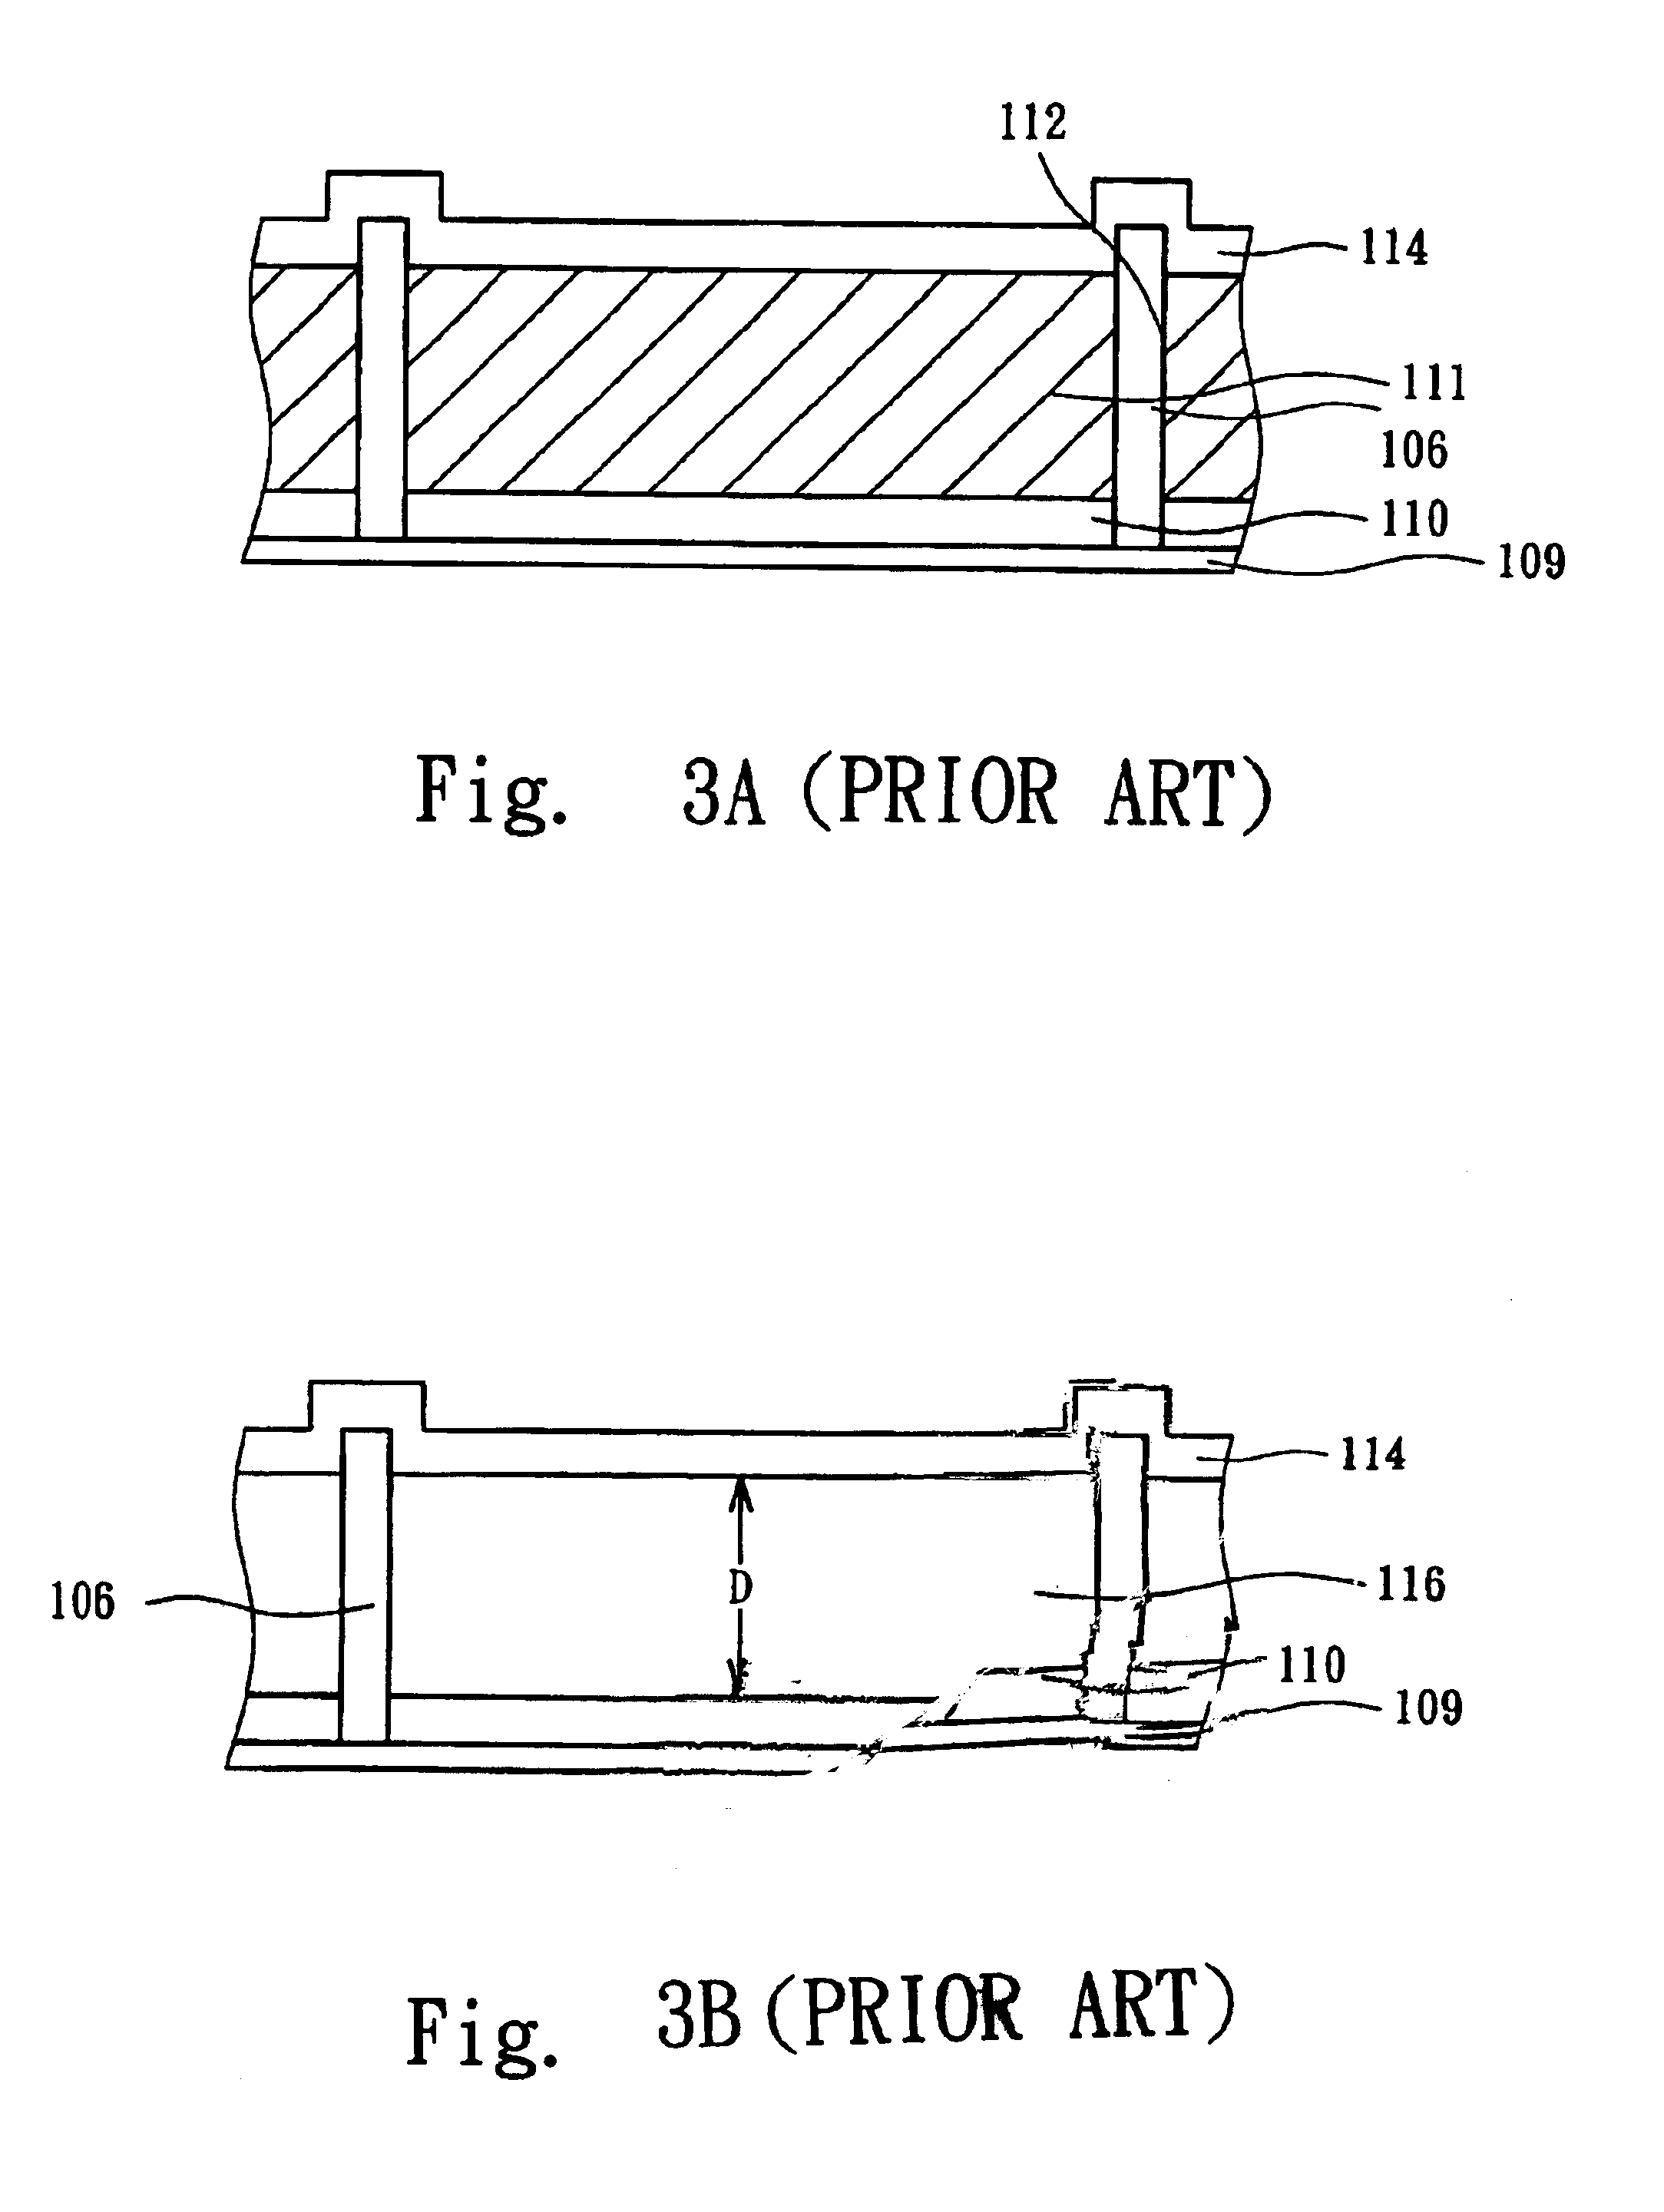 Structure of a structure release and a method for manufacturing the same